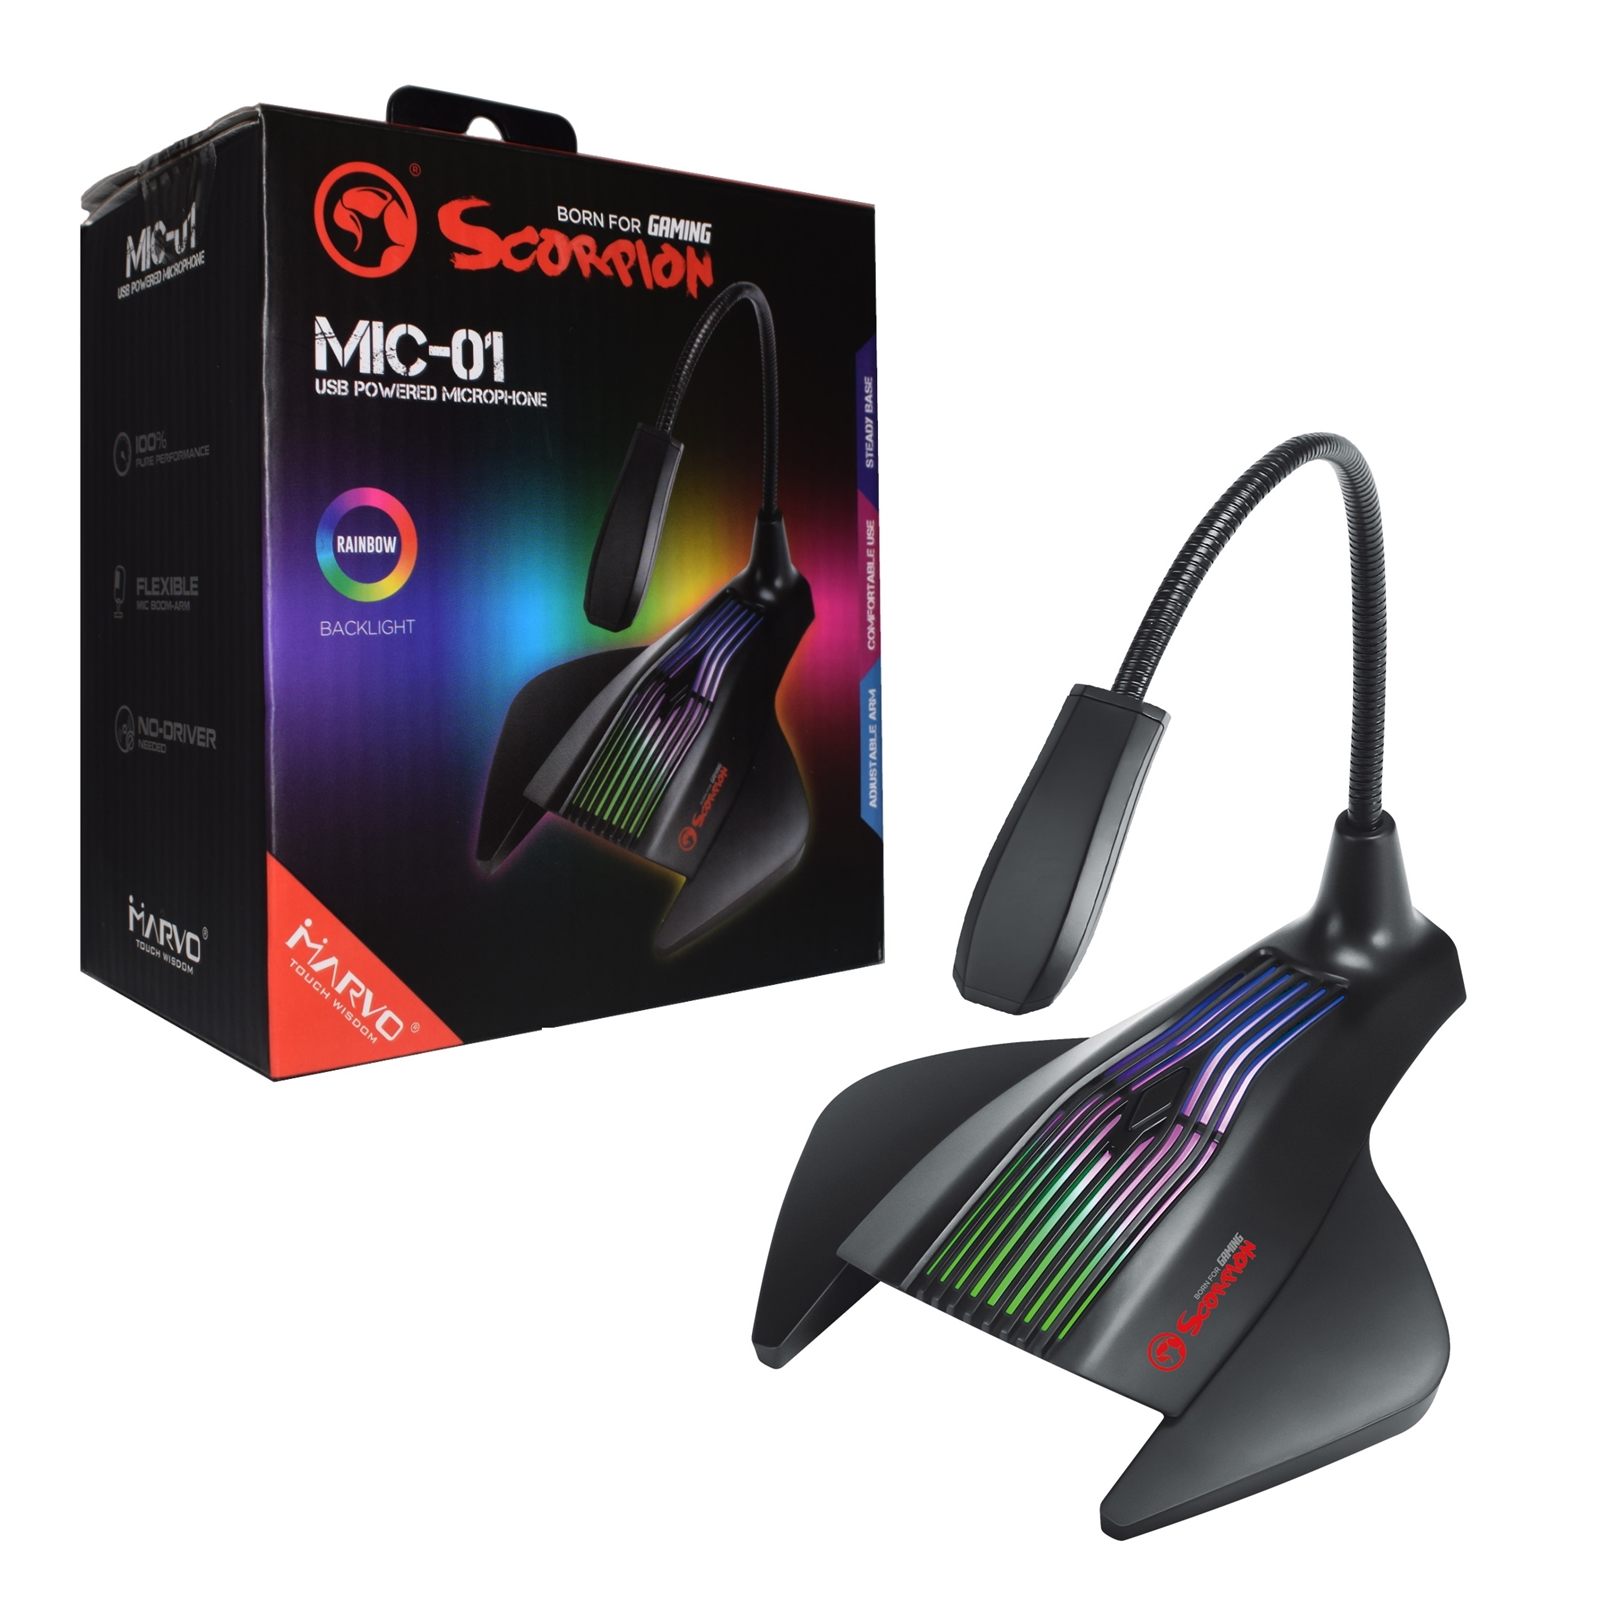 Marvo Scorpion MIC-01 RGB Gaming Microphone, USB Powered For PC or Laptop